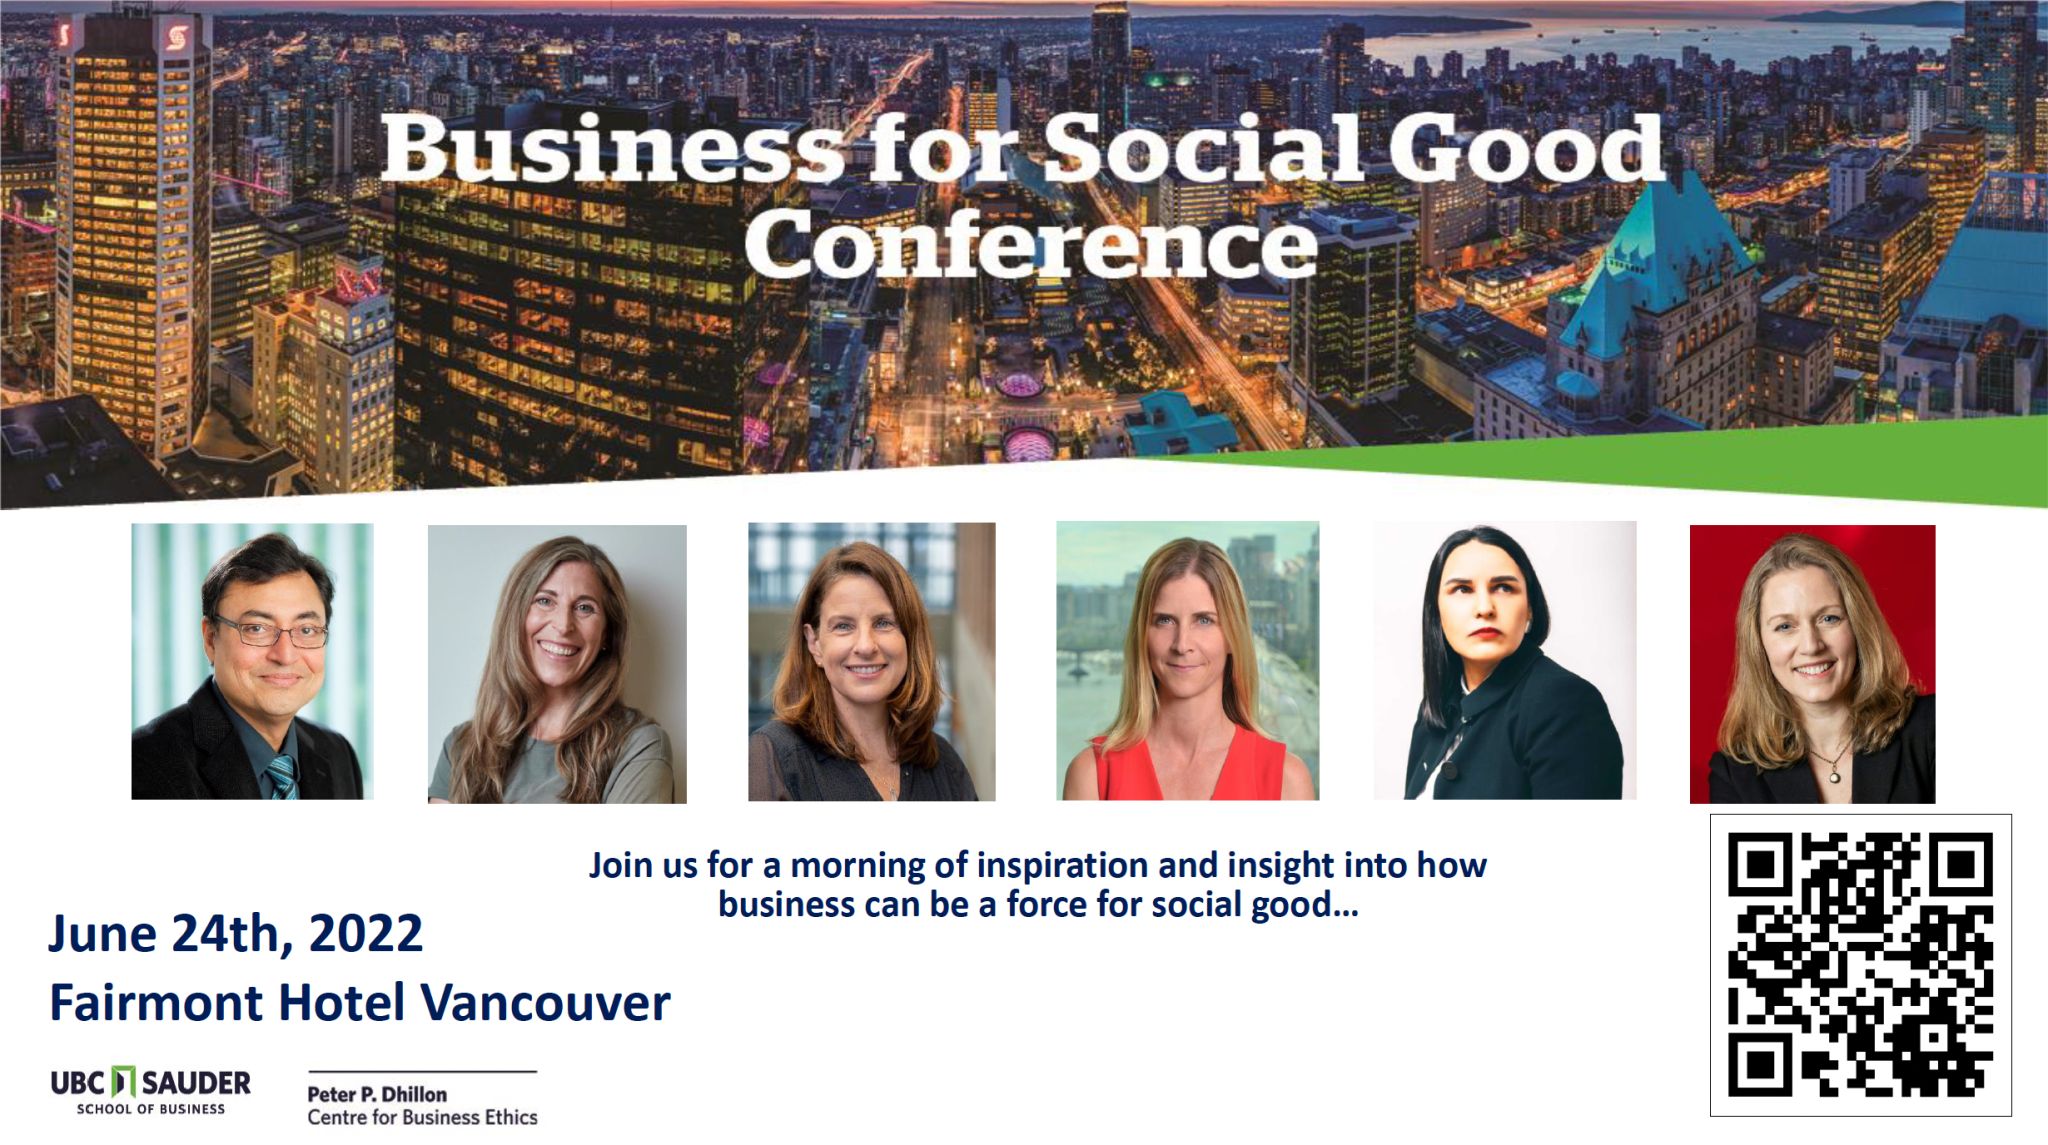 CSB Director CB Bhattacharya Participated in the UBC Sauder School of Business "Business for Social Good Conference" Panel